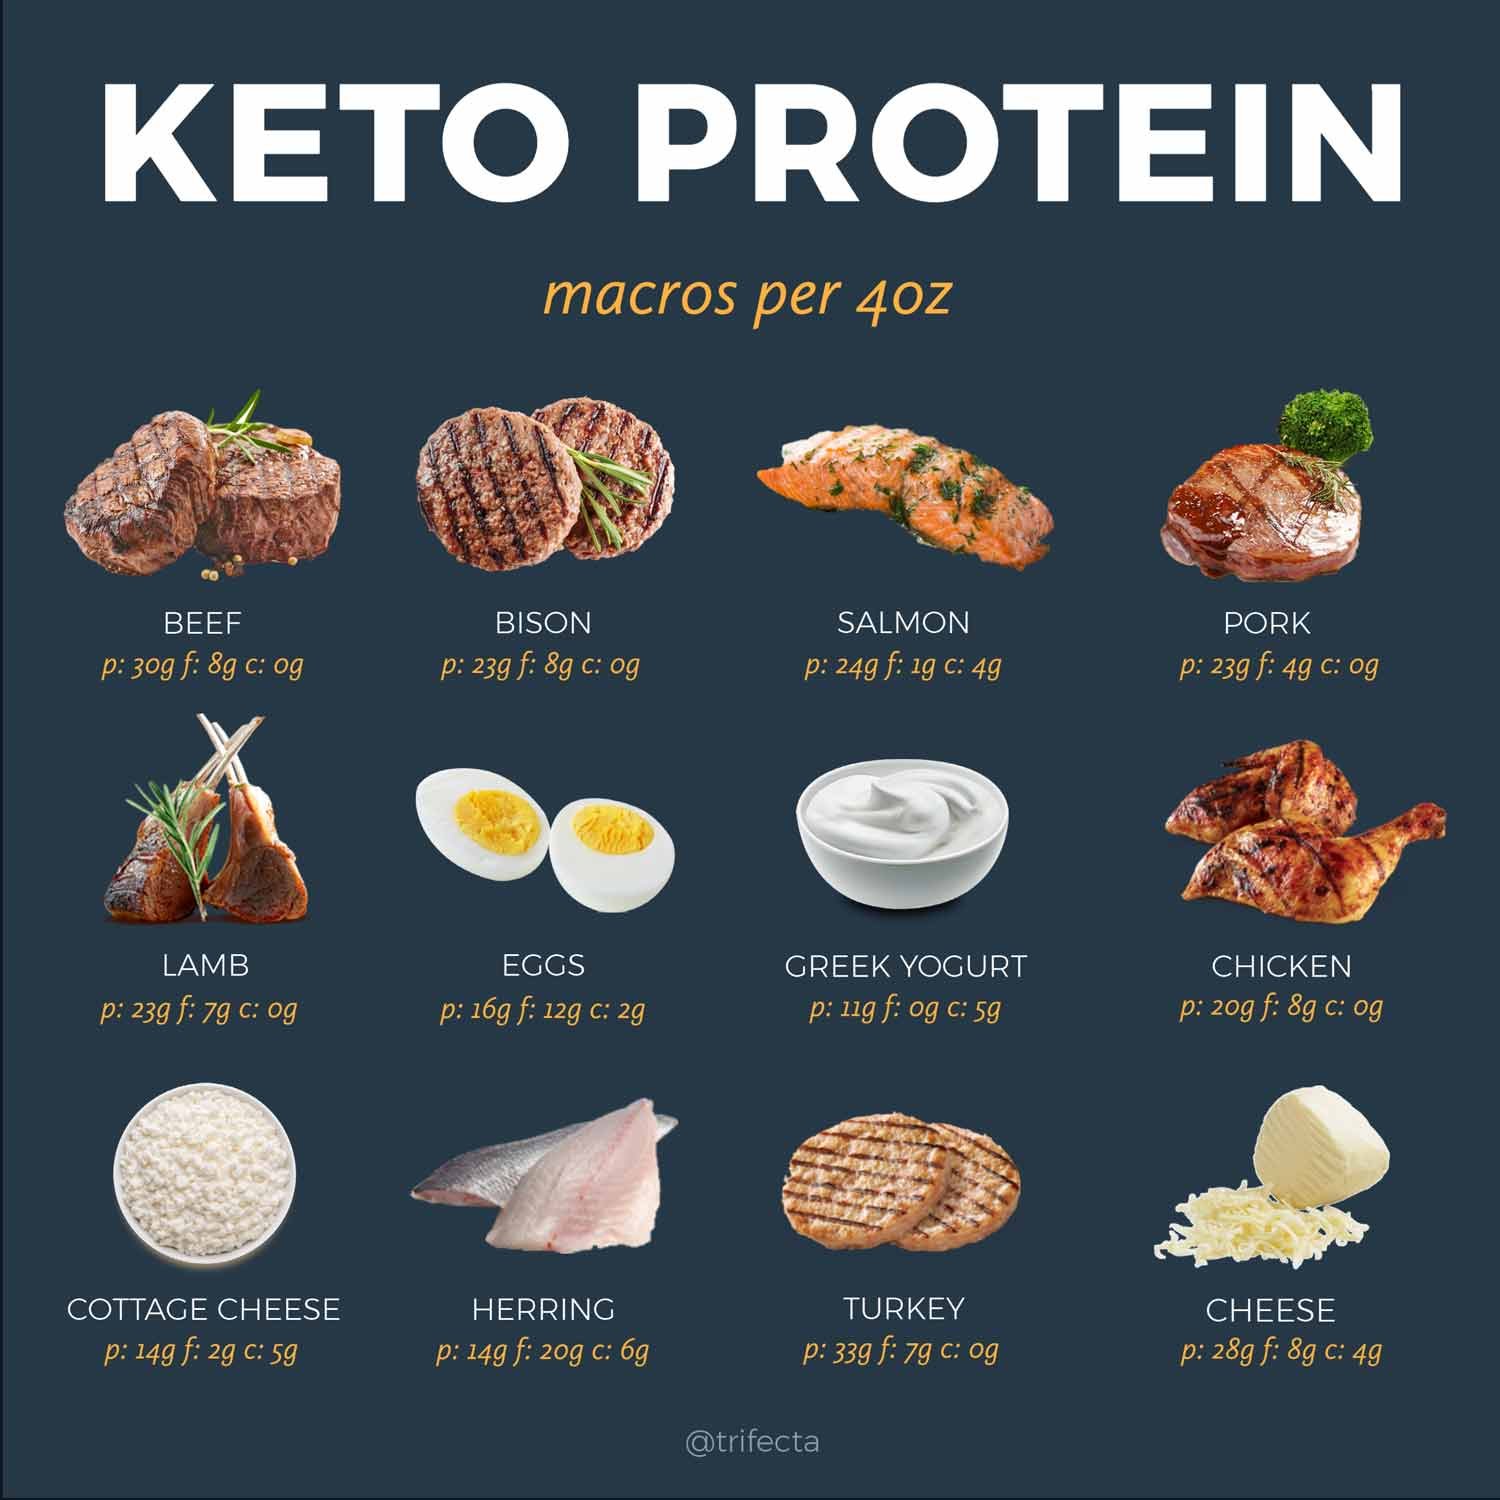 research on keto diet